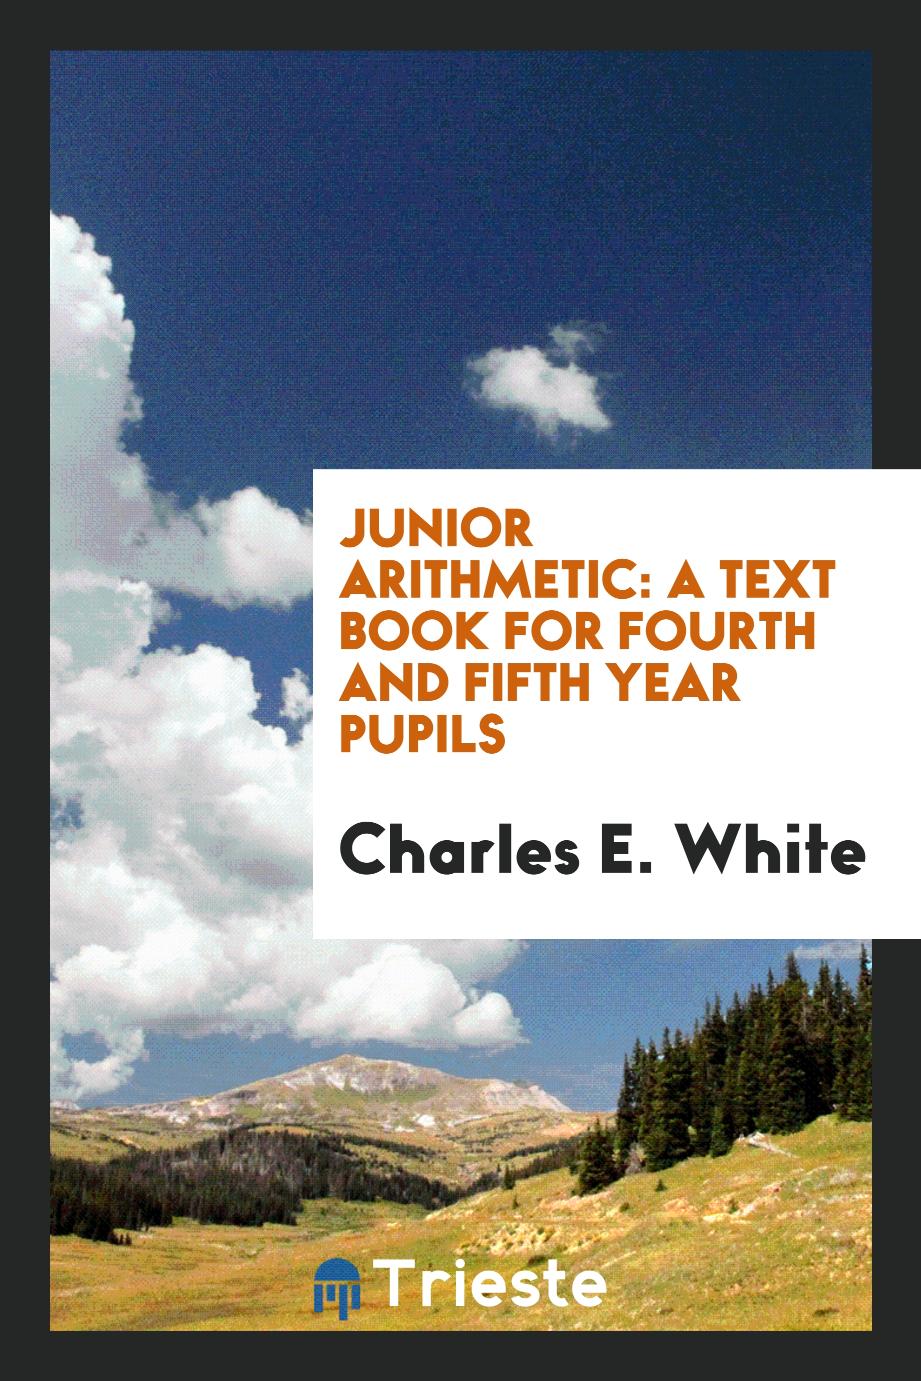 Junior Arithmetic: A Text Book for Fourth and Fifth Year Pupils